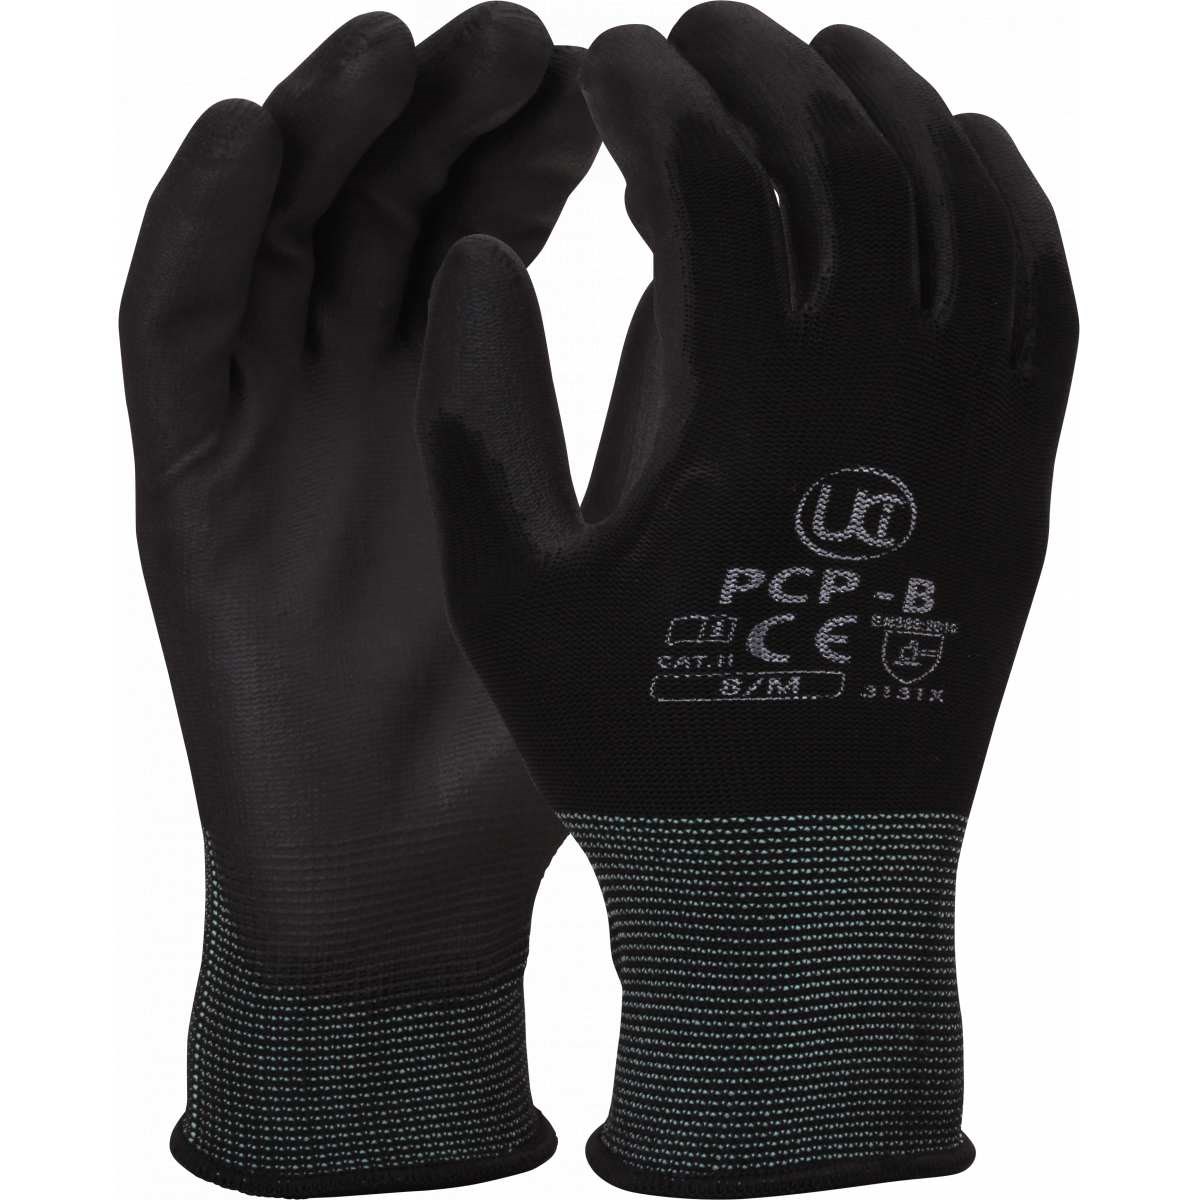 50 Pairs Of UCI PCP-B Black PU Precise Palm Coated Safety Work Gloves Size 9 